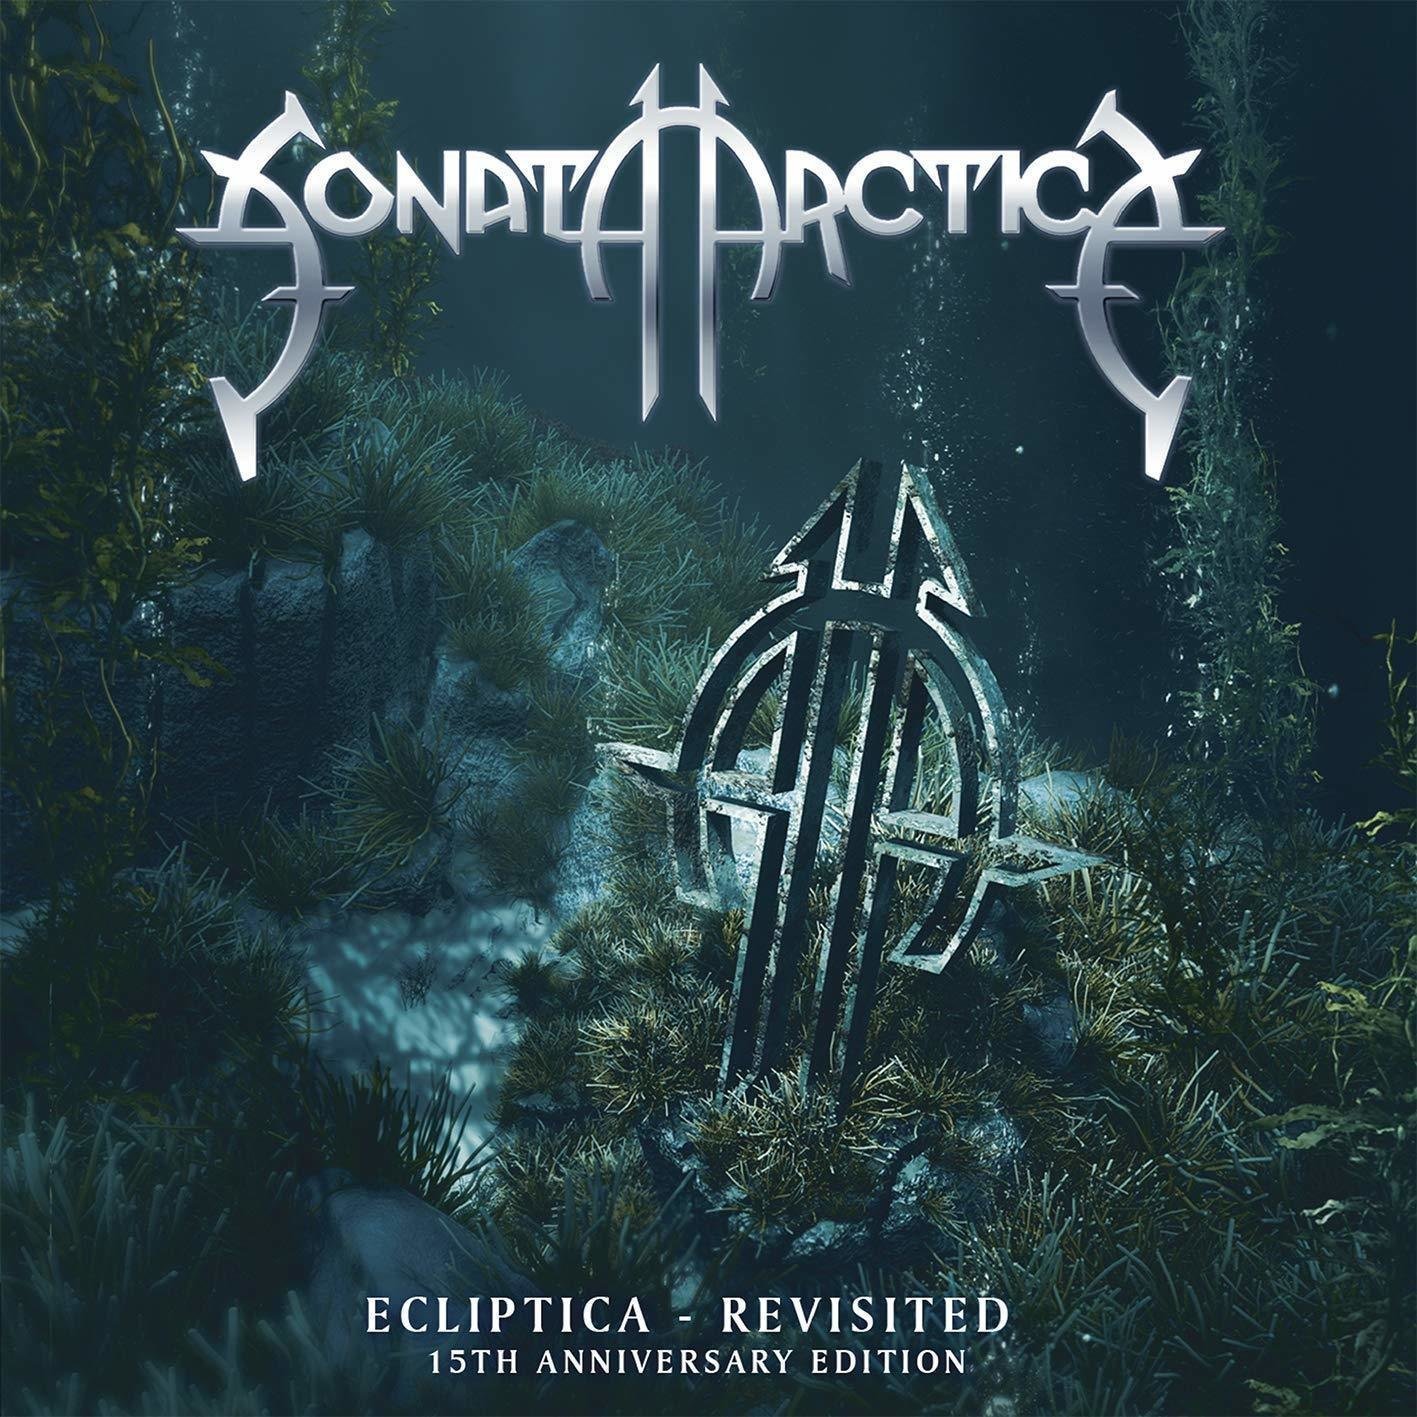 Disque vinyle Sonata Arctica - Ecliptica - Revisited: 15 Years Anniversary (Limited Edition) (2 LP)